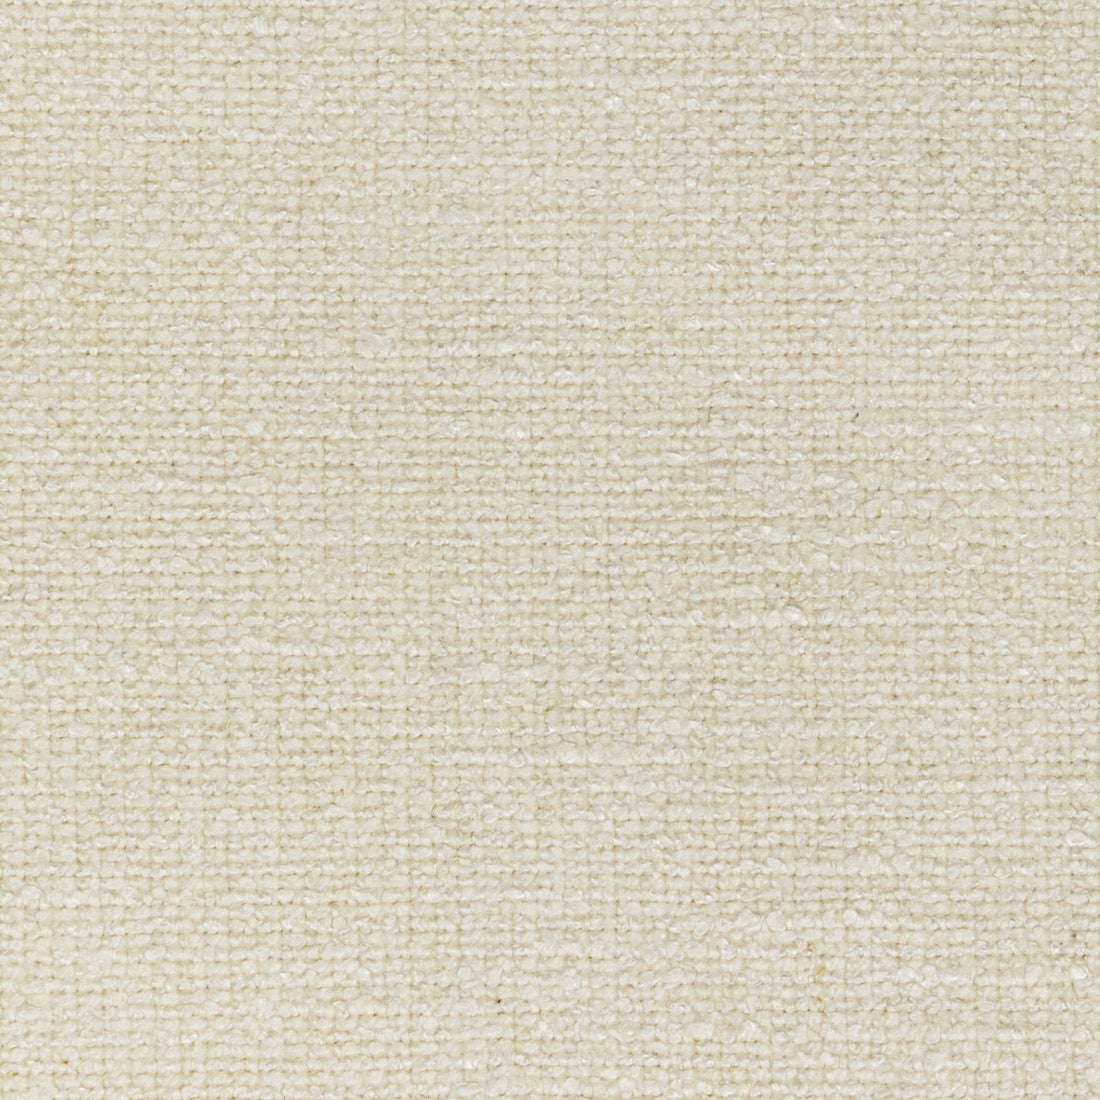 Skiffle fabric in ivory color - pattern 34449.1.0 - by Kravet Couture in the Luxury Textures II collection